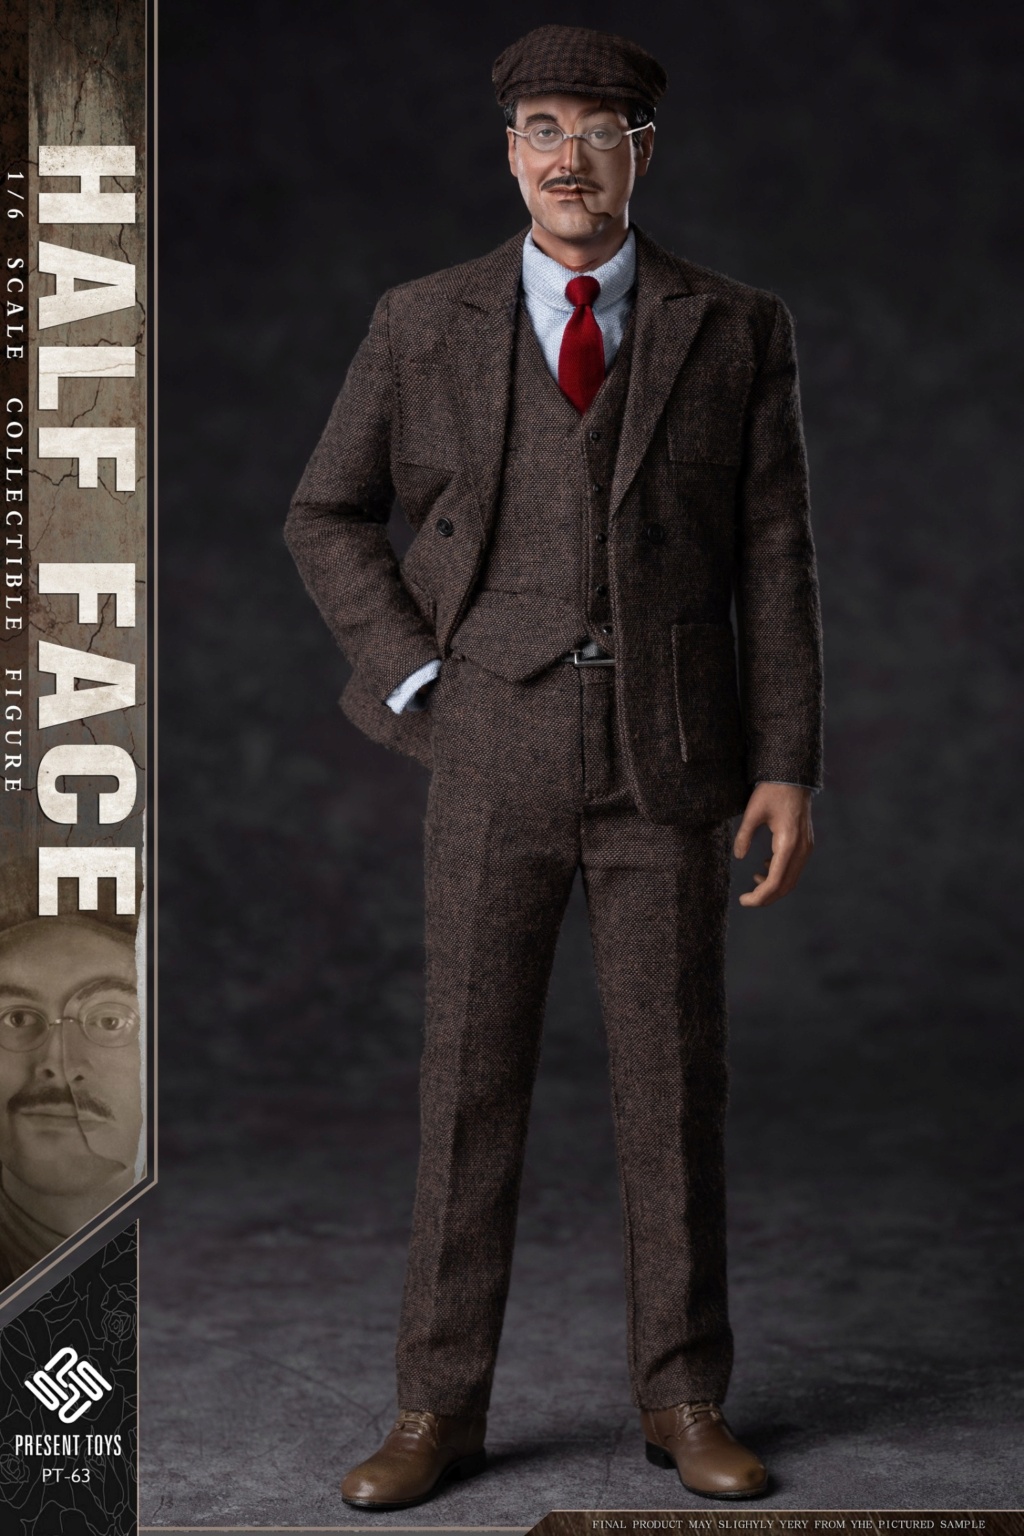 newproduct - NEW PRODUCT: PRESENT TOYS  1:6 collectiblefigure – Half Face. 19270411